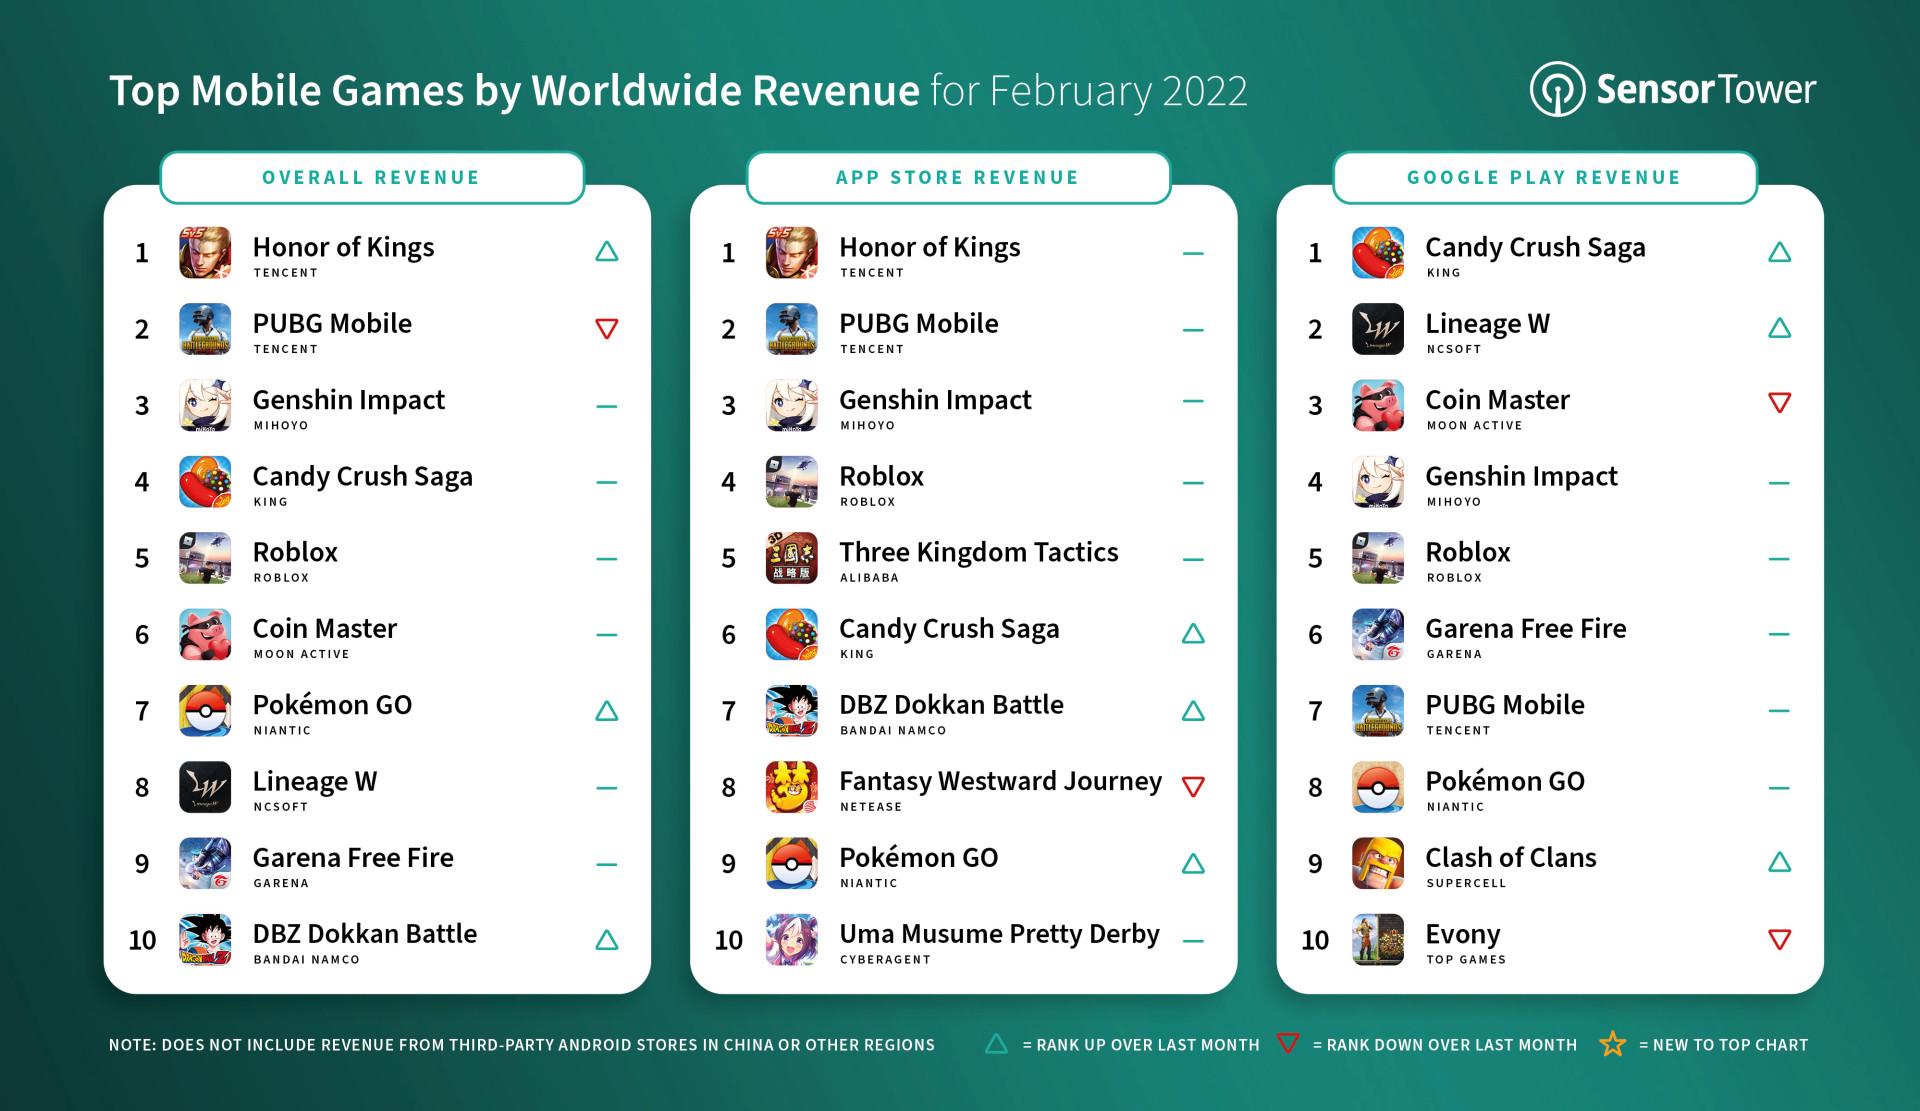 Top Grossing Mobile Games for February 2022